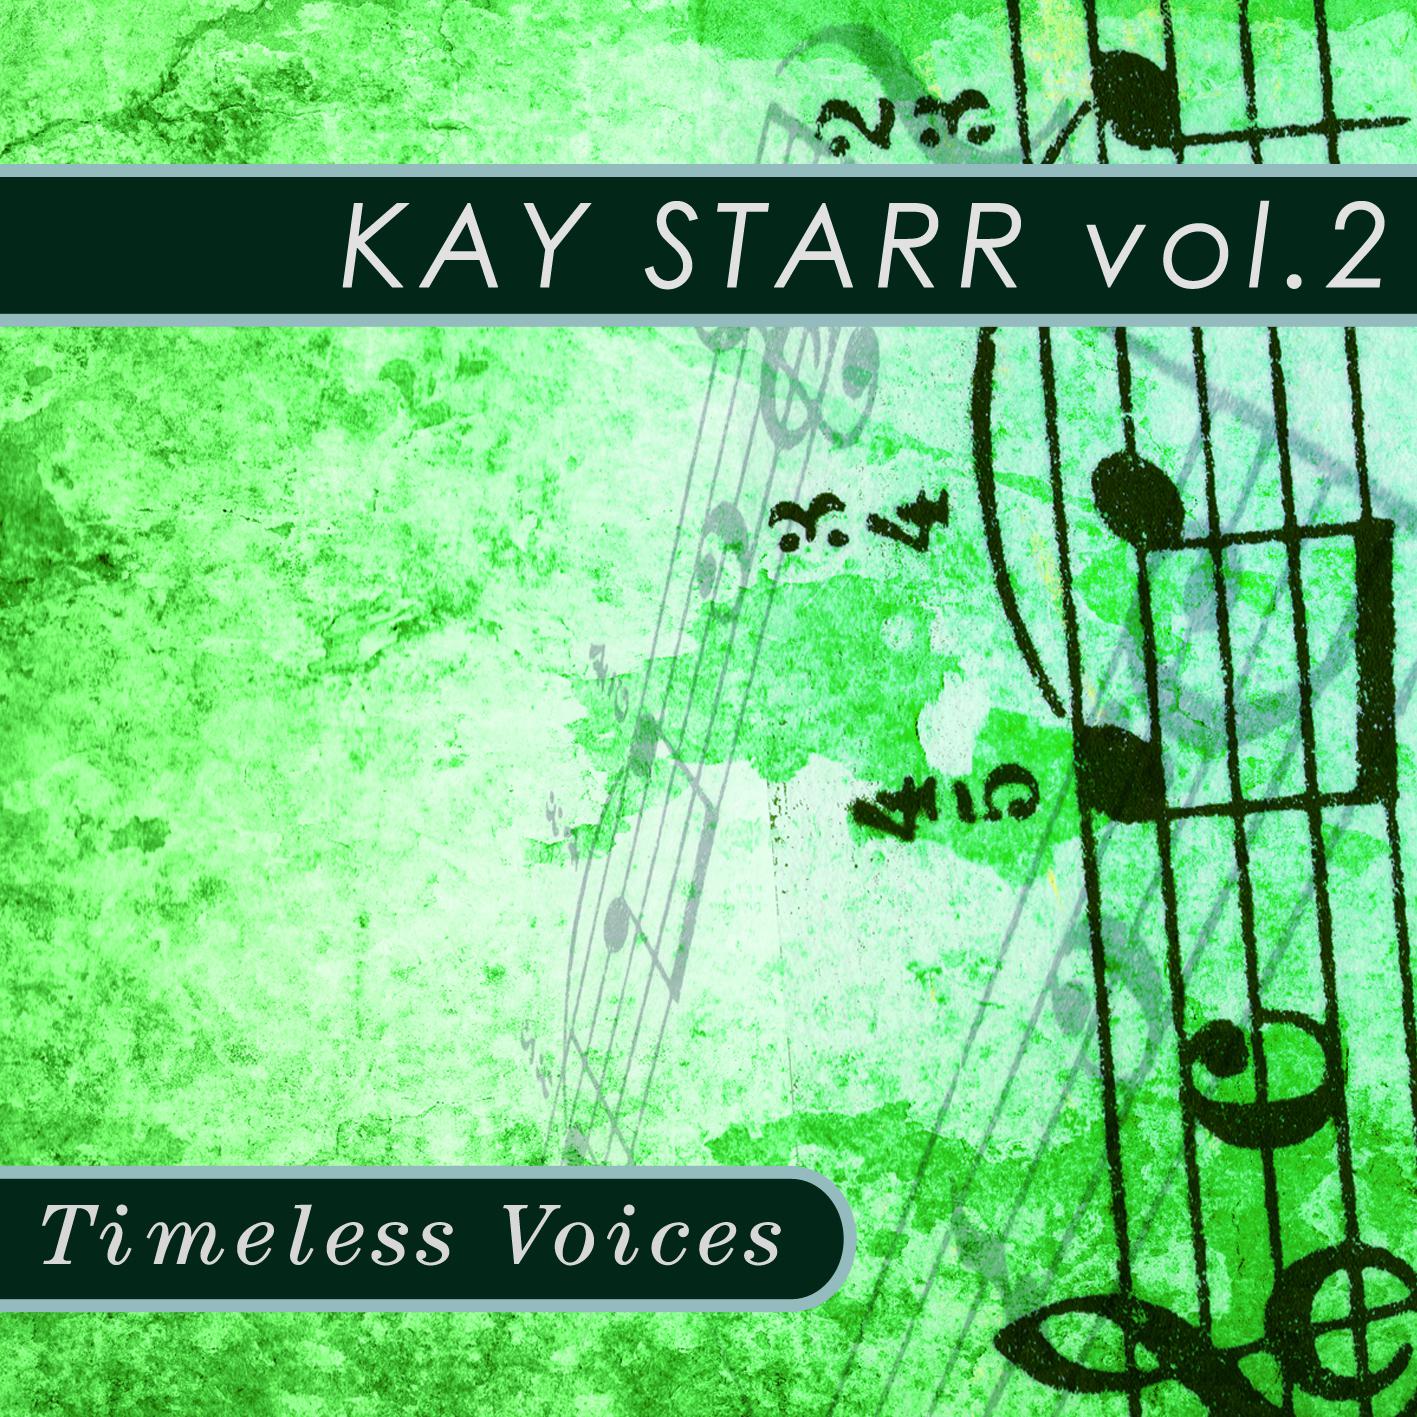 Timeless Voices: Kay Starr Vol.2